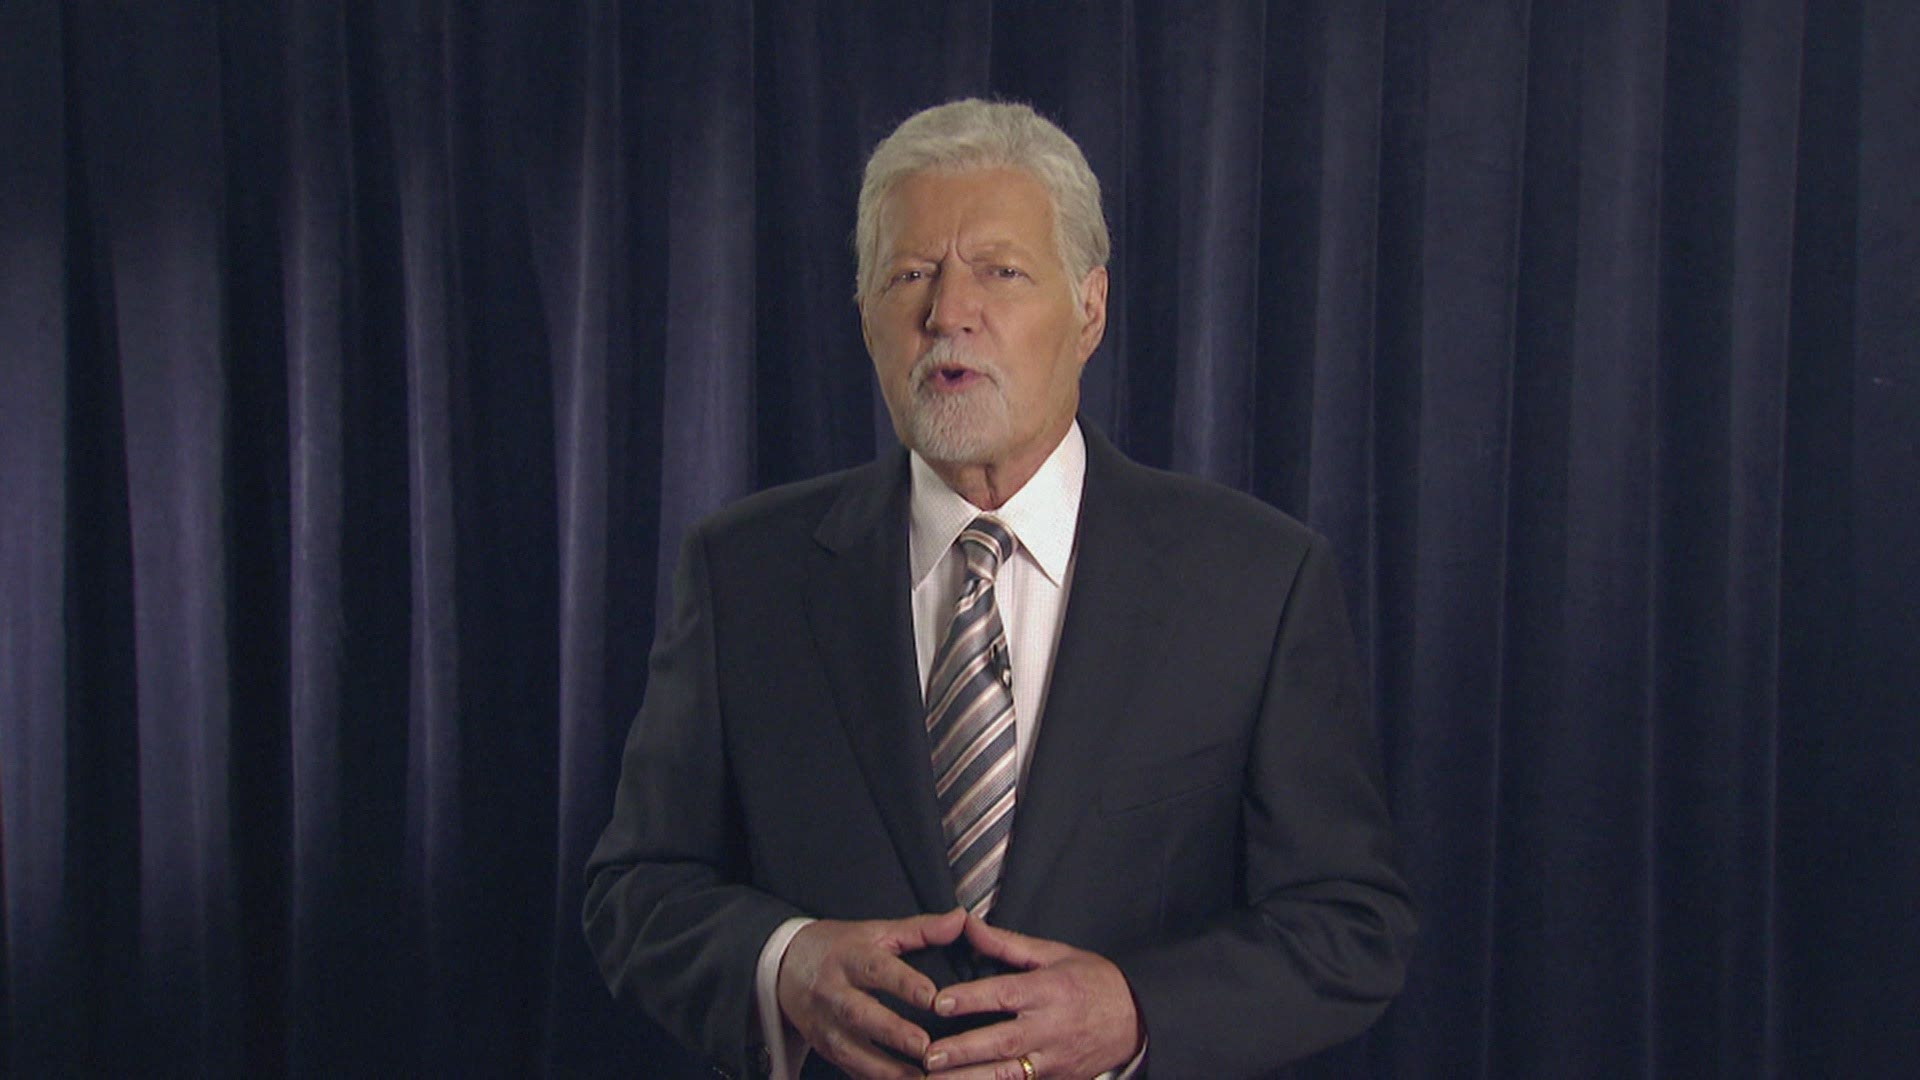 Alex Trebek has released a special message for fans to update them on his cancer battle and to discuss how "Jeopardy!" is dealing with the coronavirus pandemic.